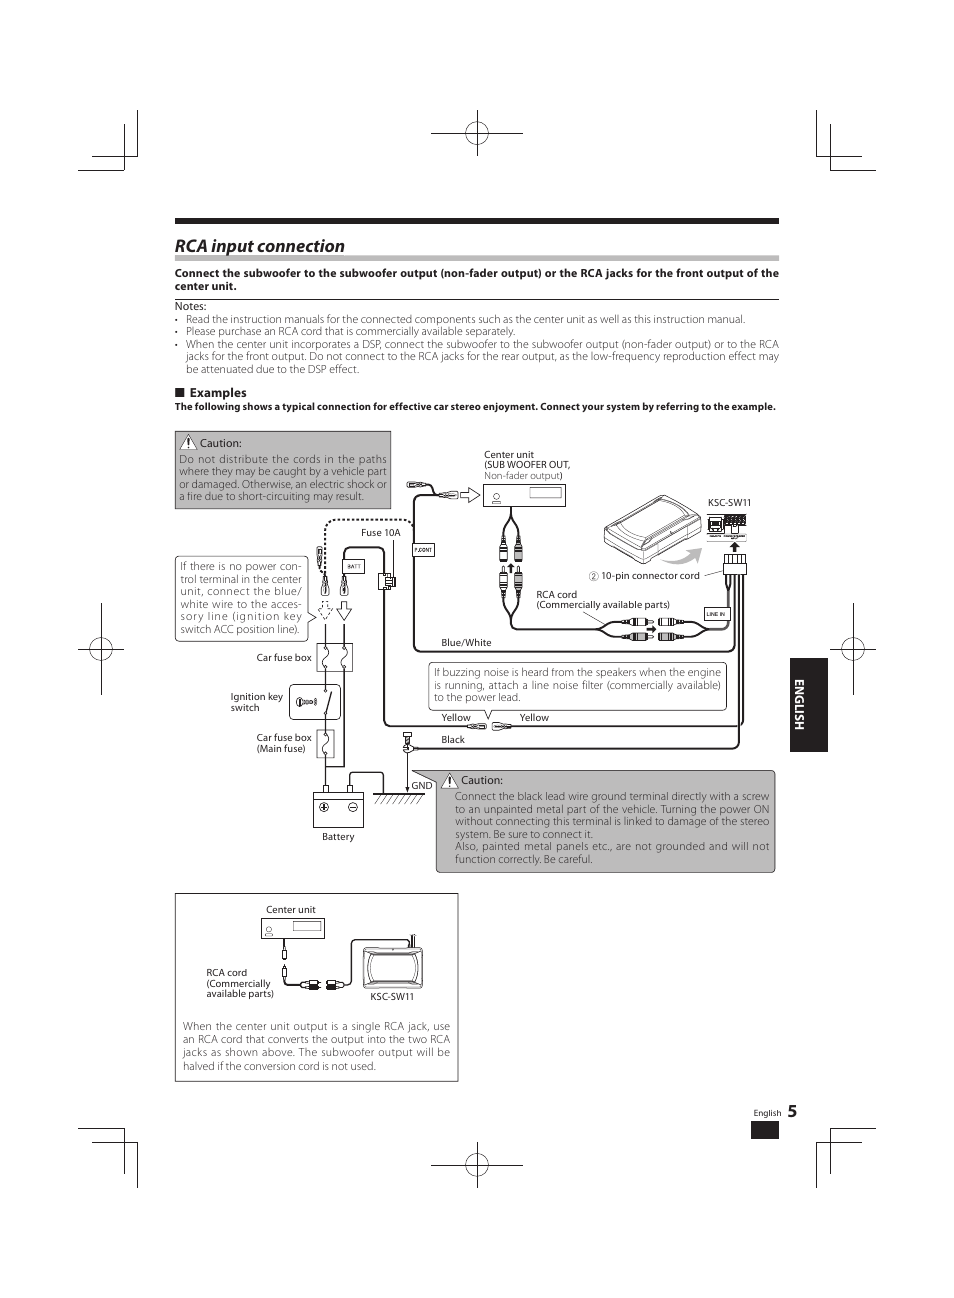 Rca input connection p | Kenwood KSC-SW11 User Manual | Page 5 / 9